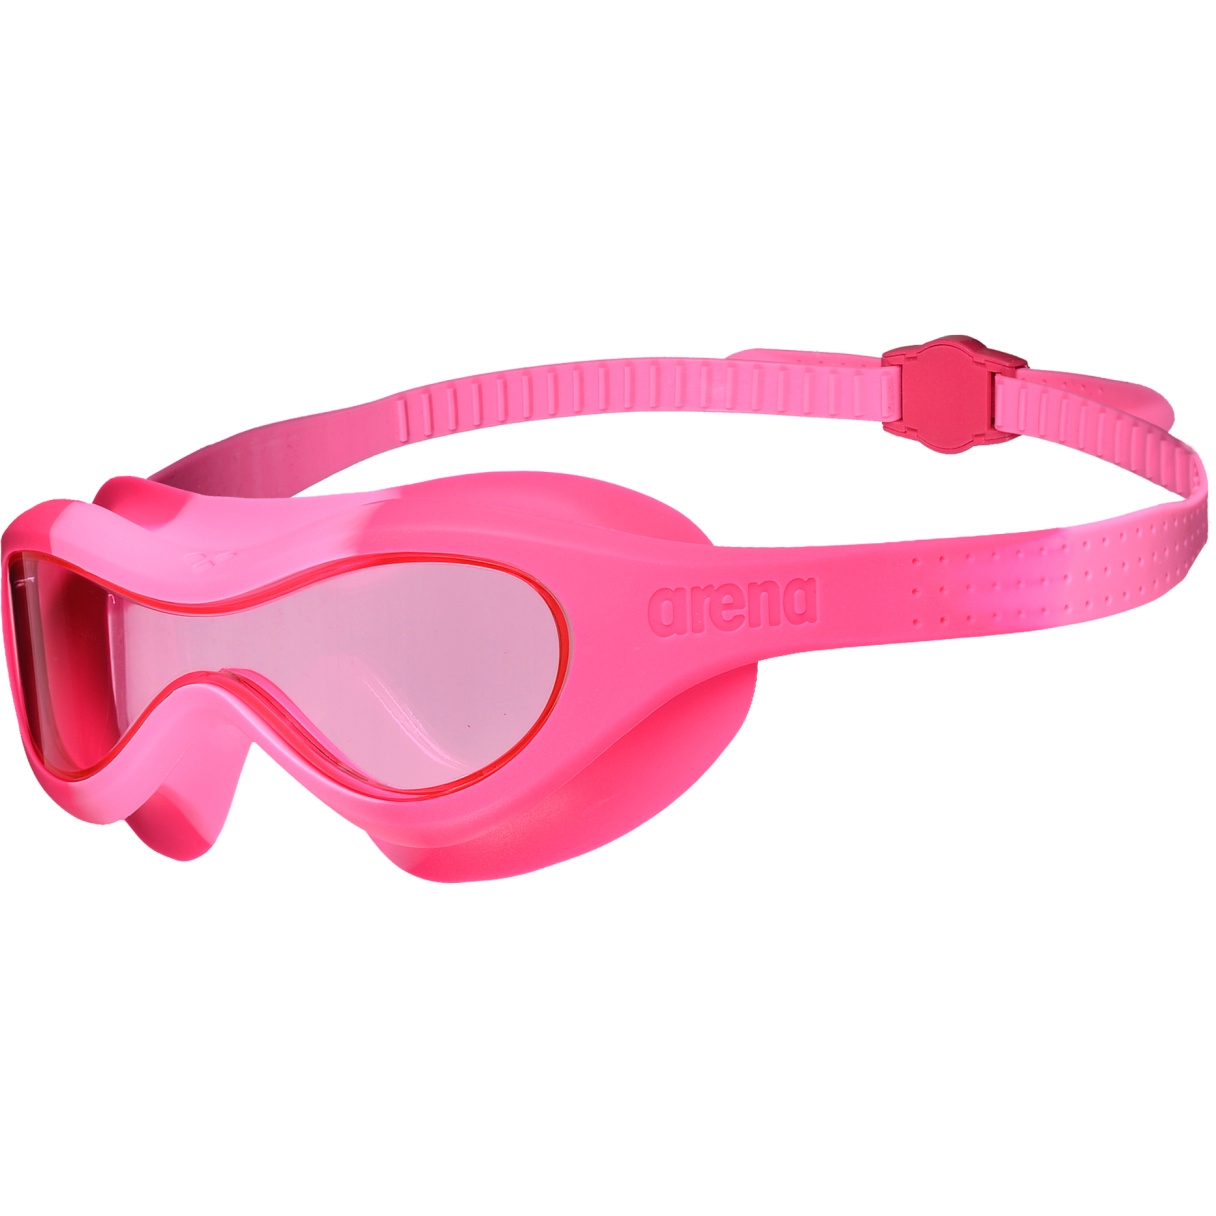 Picture of arena Spider Kids Mask Swimming Goggles - Pink - Freakrose/Pink